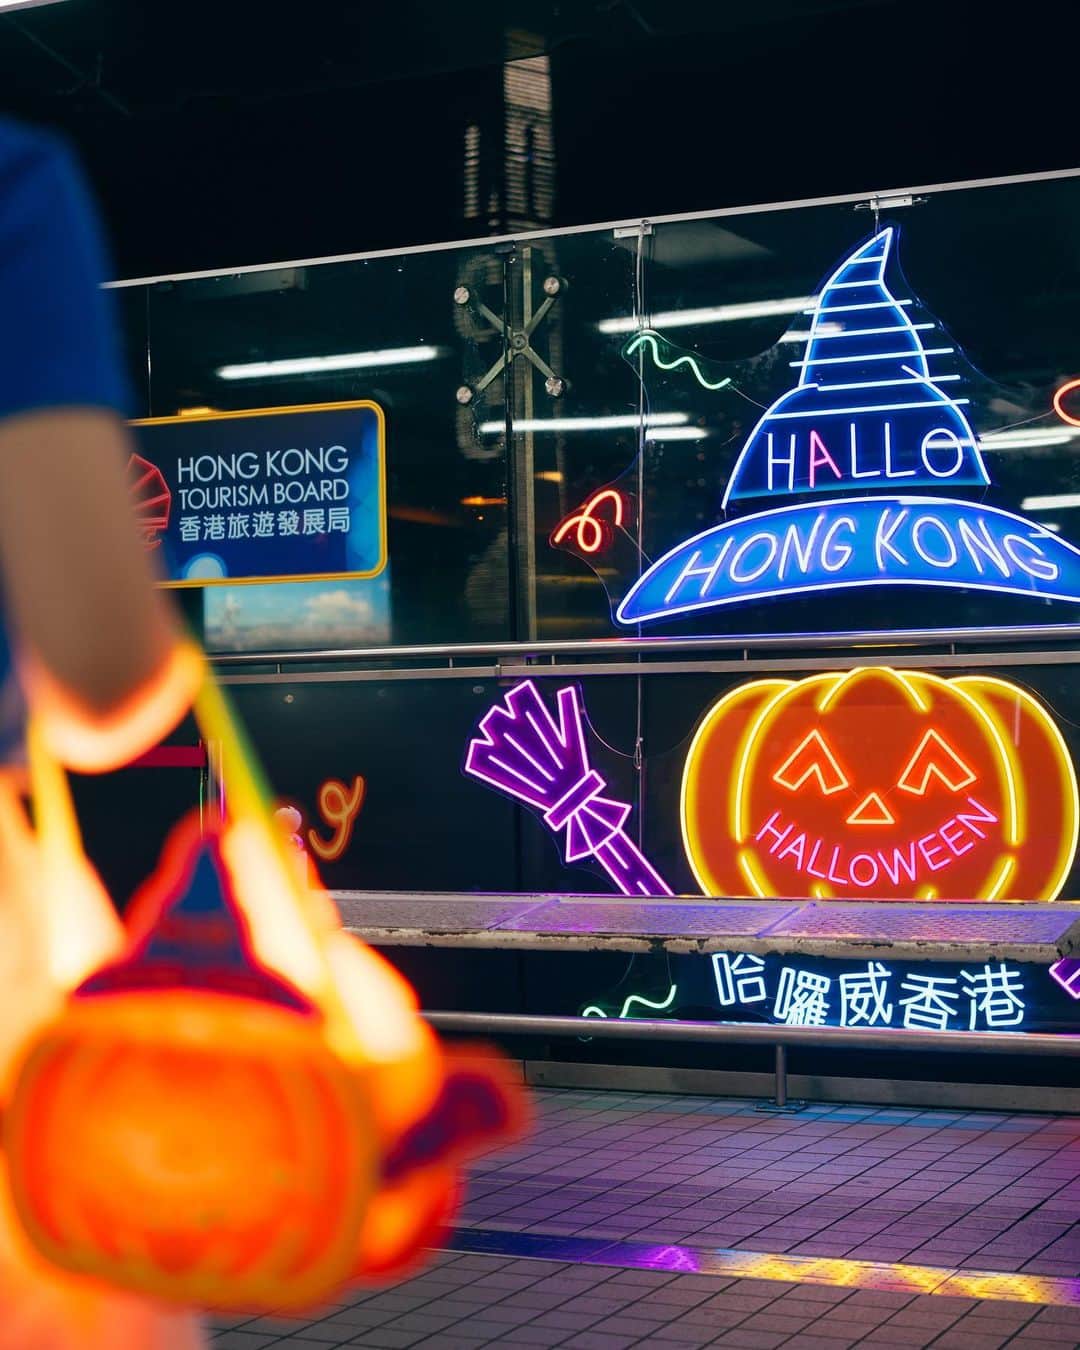 Discover Hong Kongさんのインスタグラム写真 - (Discover Hong KongInstagram)「Hong Kong, Costume On! 🎃 The city is dressed up and ready for its spookiest Halloween celebration! 👻 Get ready for a wicked adventure as you hunt down the enchanting installations across the city! Don't forget to snap some IG snots 📸 with these ghostly pumpkins that await you at every corner! 😈  唔俾糖🍬就搗蛋，萬聖節🎃就到喇，你準備好同香港一齊變裝未？全港多達14個地方已化身成哈囉威打卡熱點📸，記得袋穩相機，隨時野生捕獲搞鬼節日主題裝置藝術同燈飾，一齊歡度呢個咁鬼好玩嘅節日。😈  1️⃣7️⃣: Central Pier 中環碼頭 2️⃣: Admiralty MTR Station 金鐘港鐵站 3️⃣4️⃣: Star Ferry 天星小輪 5️⃣6️⃣: Harbour City 海港城 8️⃣: Ocean Park MTR Station 海洋公園港鐵站  #哈囉威香港 #HalloHongKongHalloween #HelloHongKong #DiscoverHongKong  🎃👻🎃👻🎃👻🎃👻🎃👻🎃👻🎃👻🎃👻🎃👻 What else can you do at night in Hong Kong?🌃 Stay tuned for our #HongKongAfter6 !👀 想知嚟緊夜晚有乜玩？🌃記得跟貼我哋嘅 #HongKongAfter6 ，更多節日盛事、玩樂好去處等緊你！👀」10月19日 21時56分 - discoverhongkong